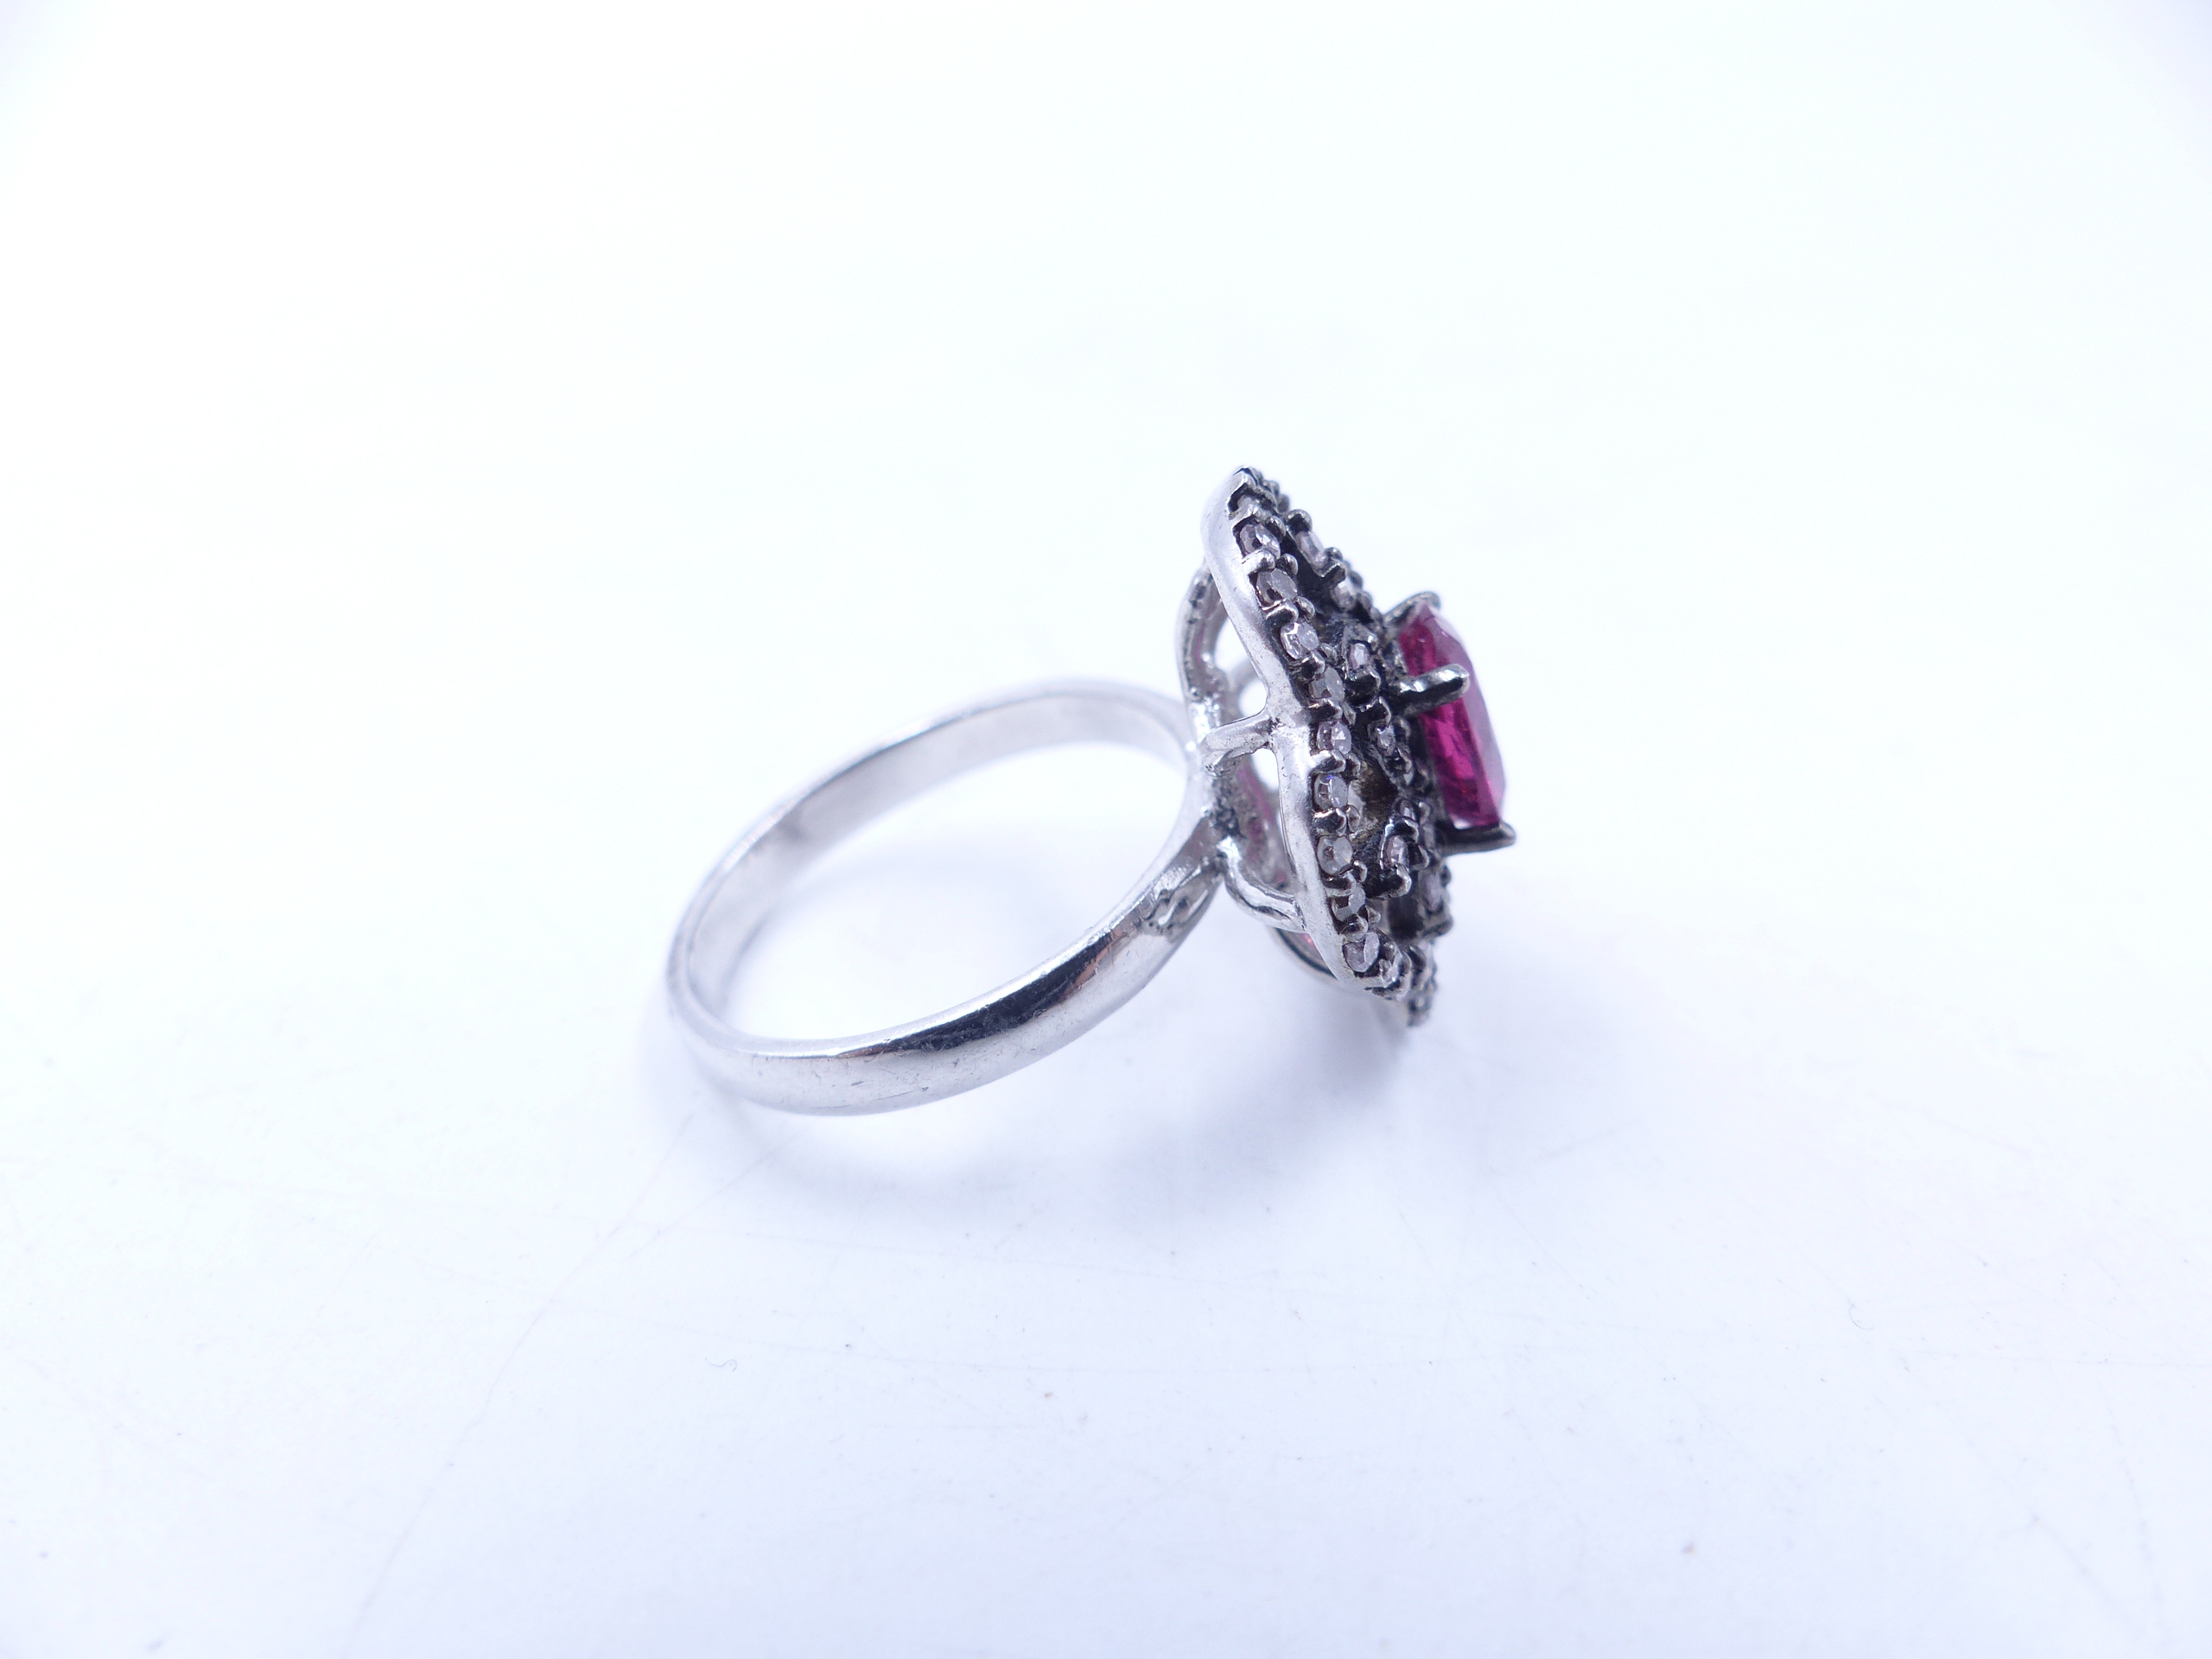 A PINK TOURMALINE AND DIAMOND OPEN WORK FILIGREE RING SET IN A WHITE METAL MOUNT,THE CENTRAL PINK - Image 7 of 17